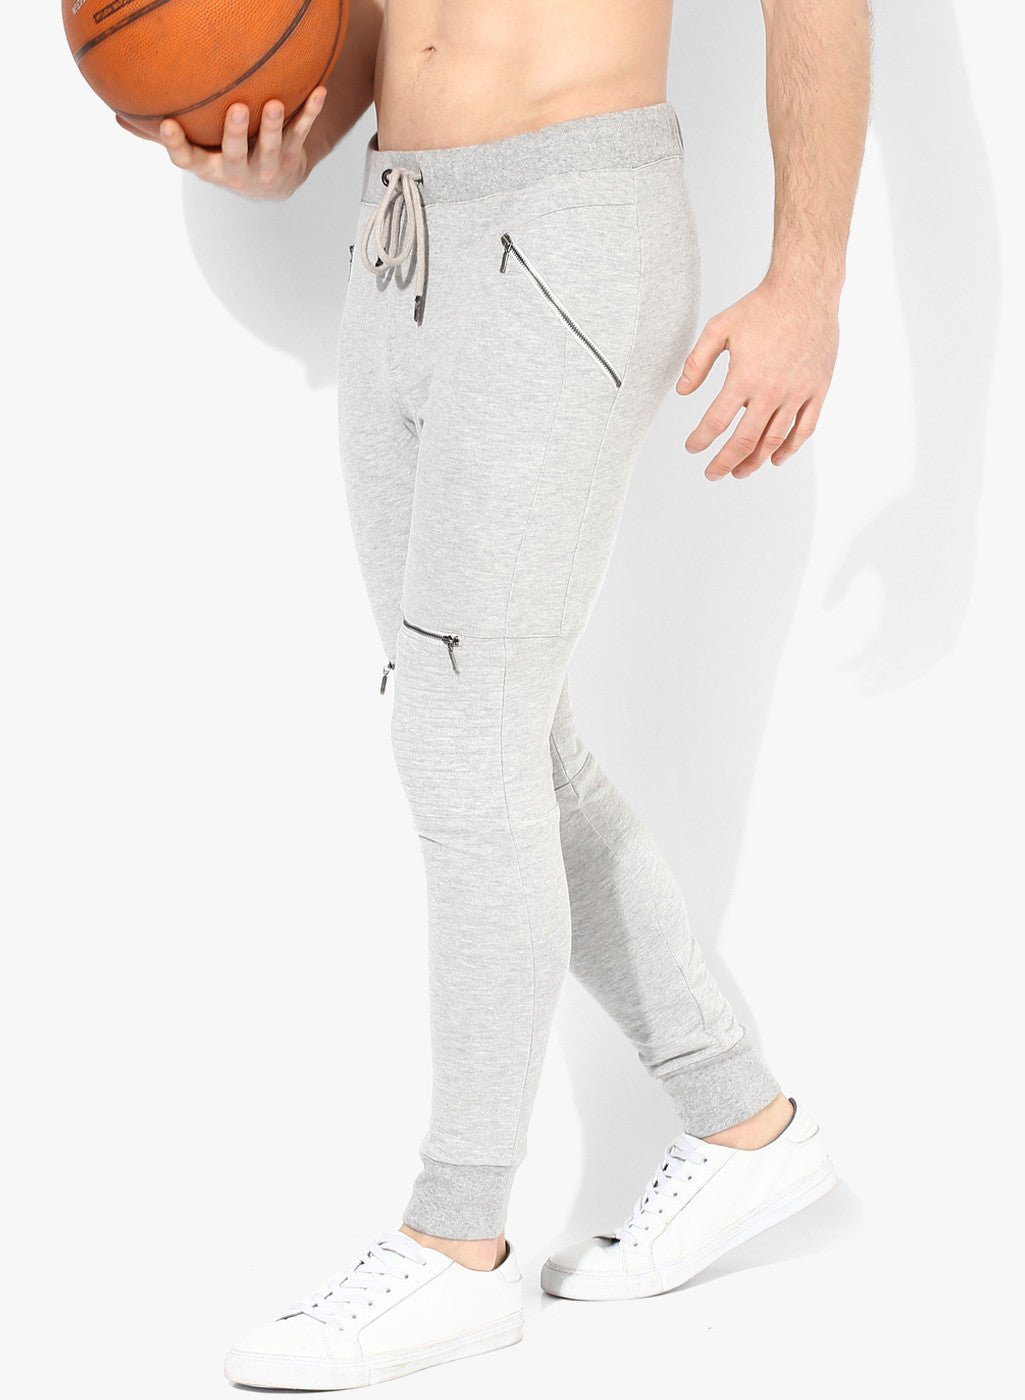 Spiritual Warrior grey joggers for men are both comfortable and high quality. They keep you cool and dry. These sweatpants are great for yoga, gym, relaxing